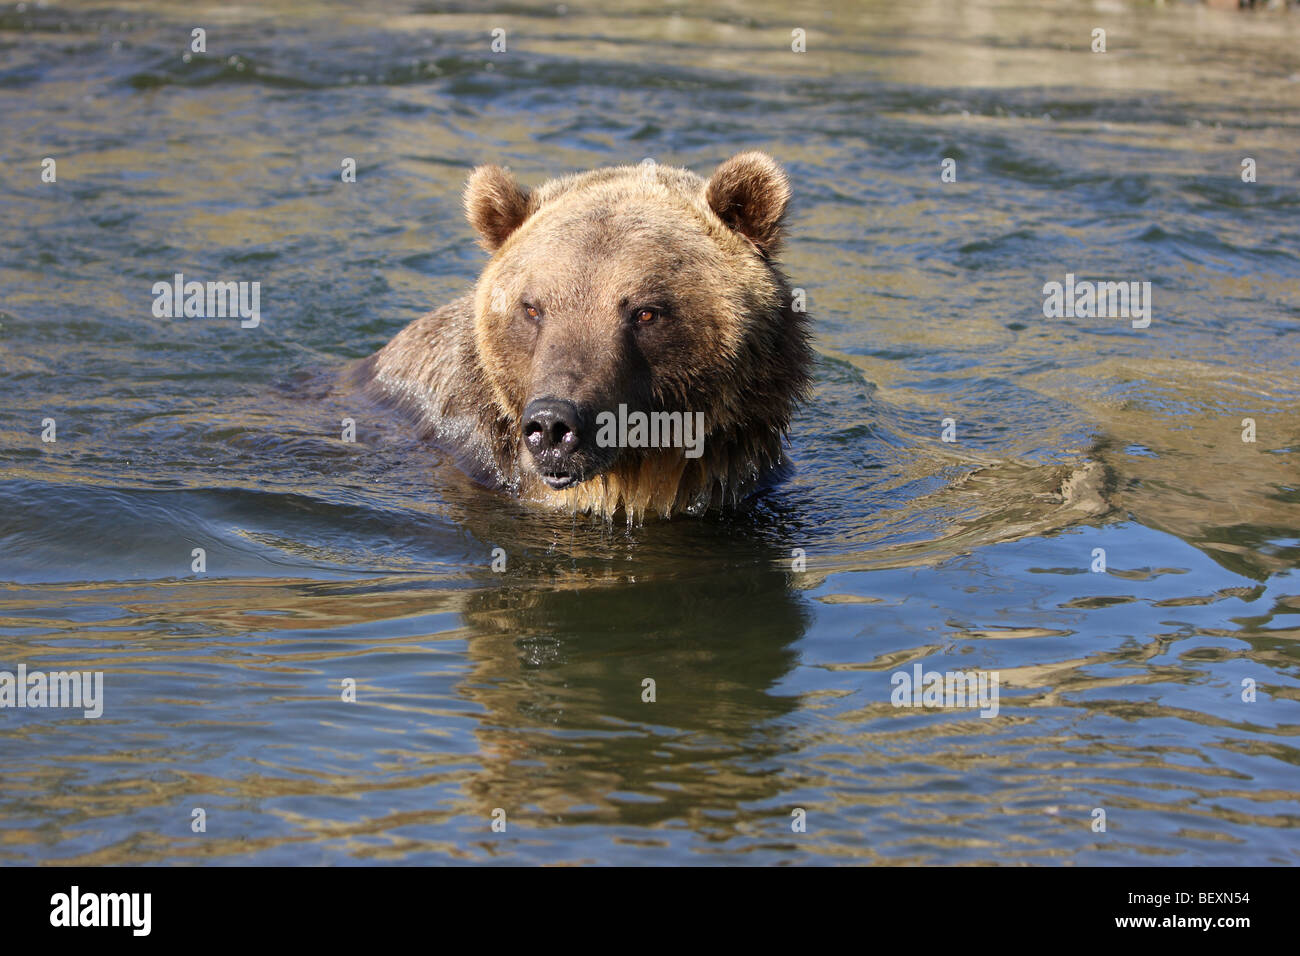 Grizzly bear, swimming in river Stock Photo